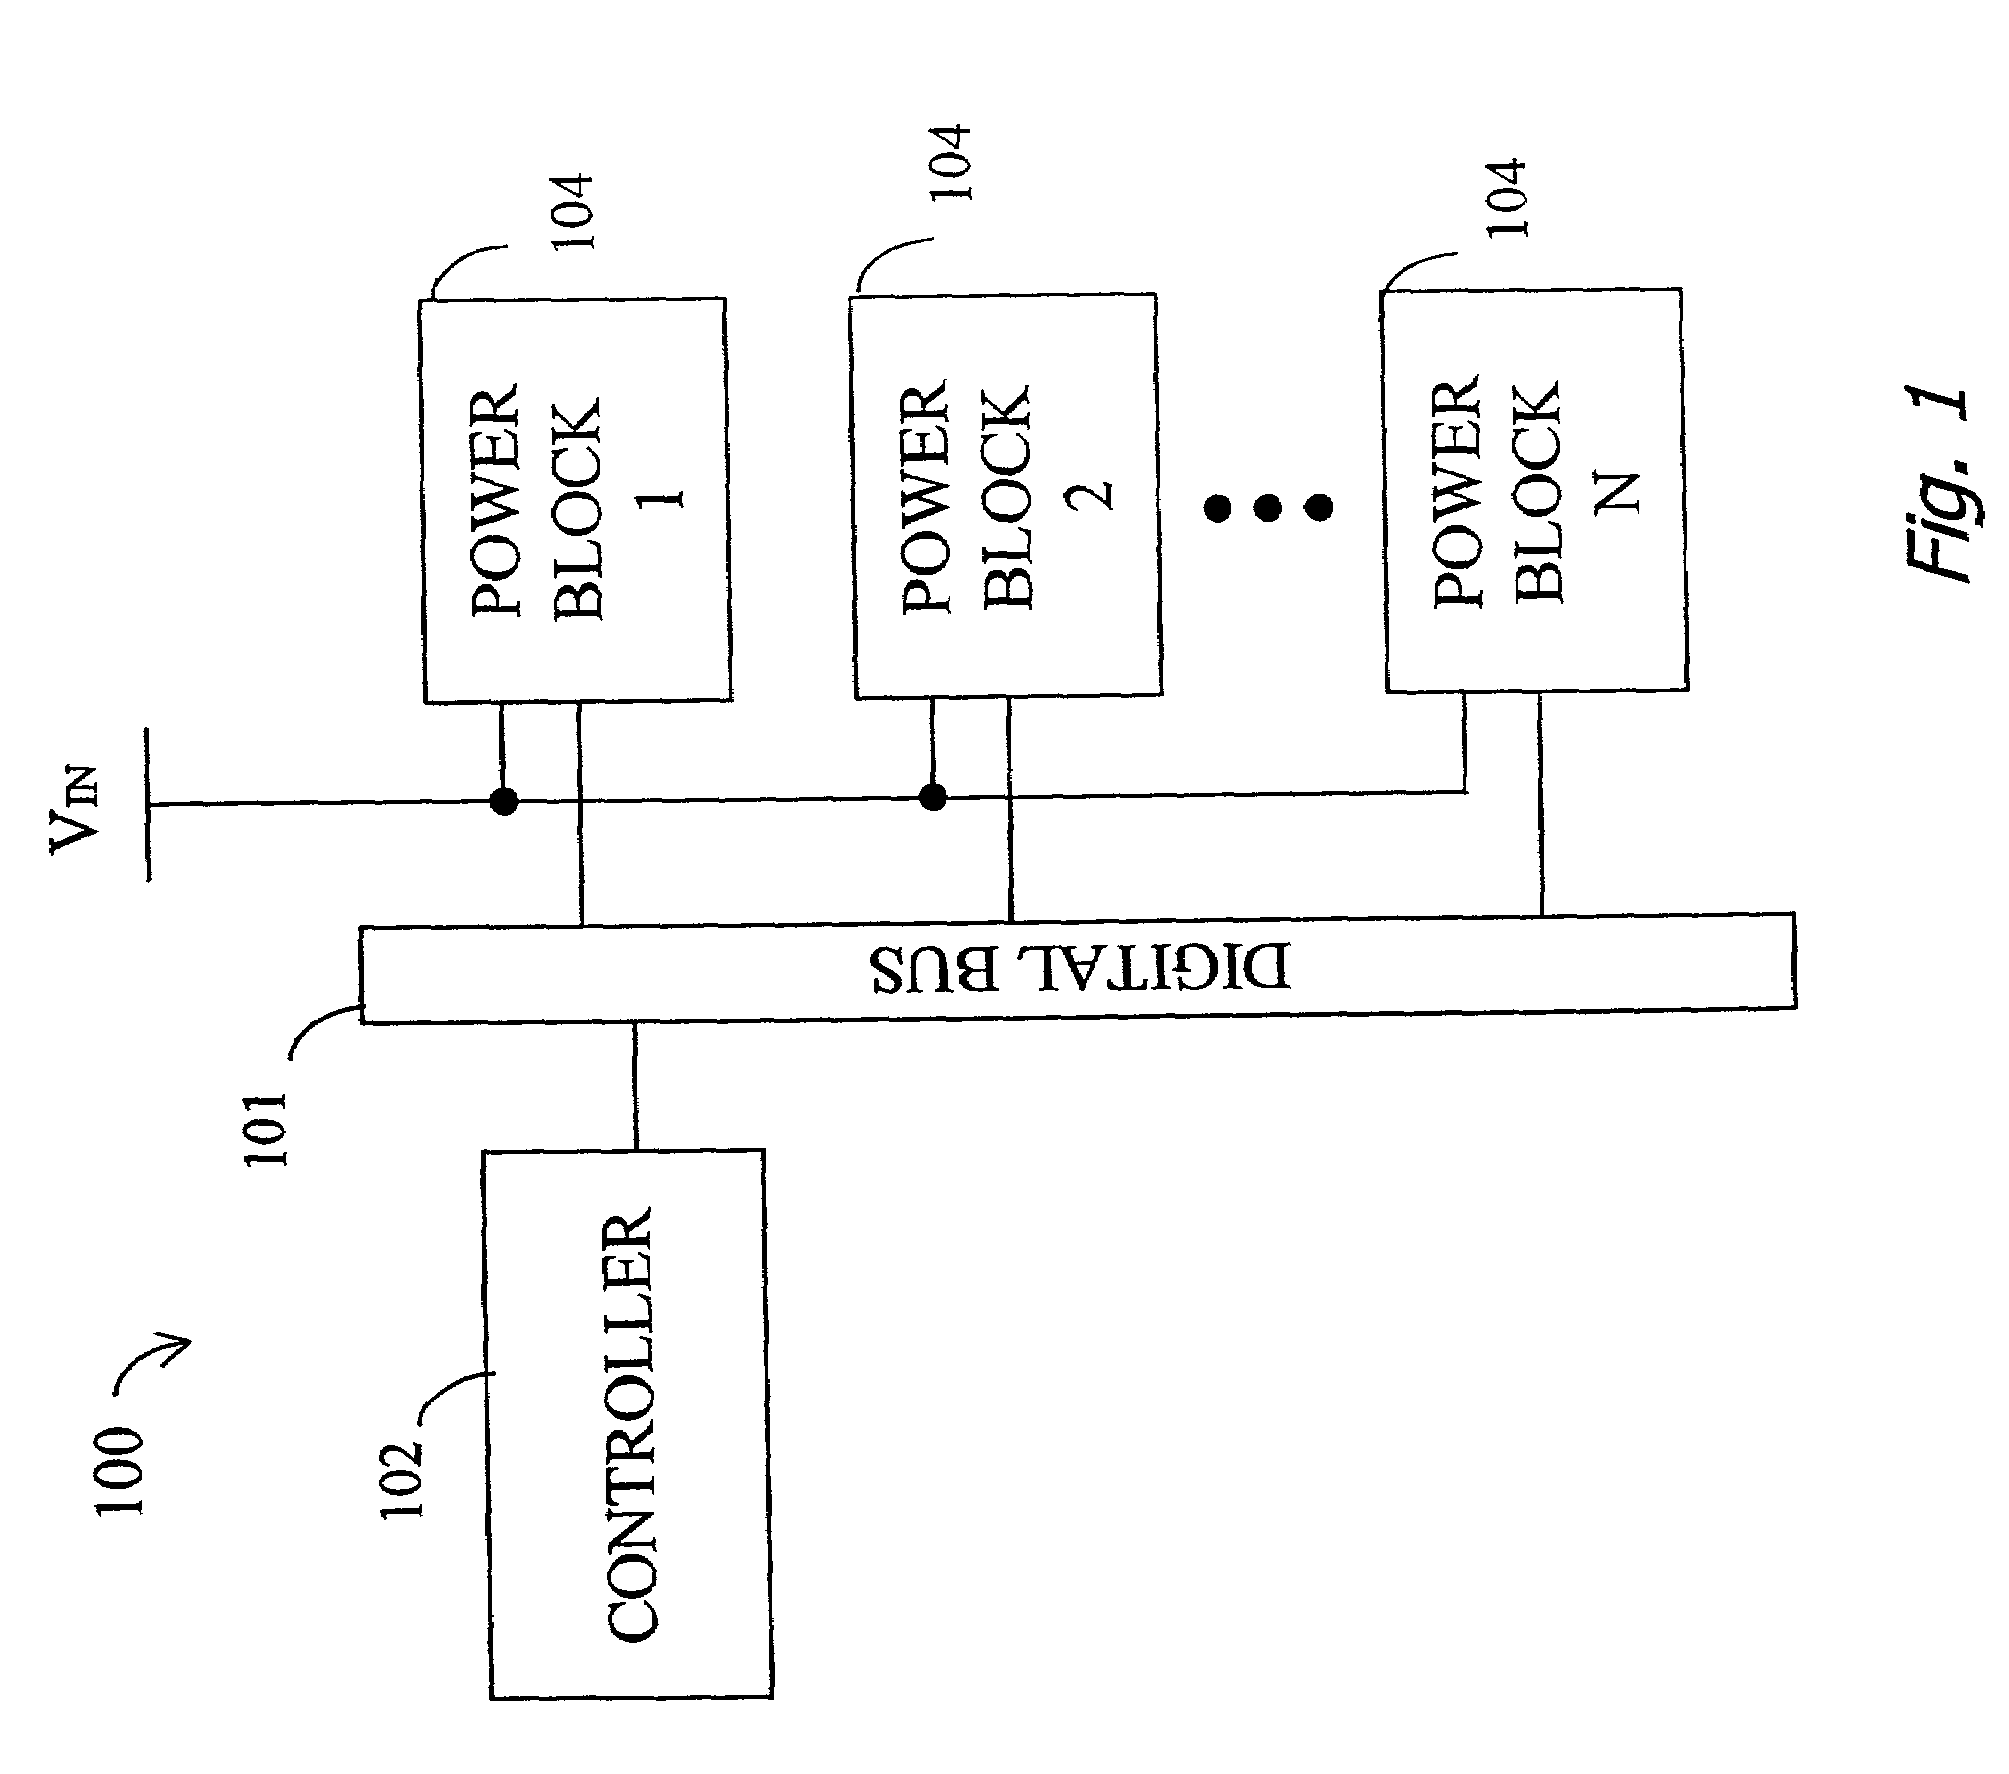 System and method for highly phased power regulation using adaptive compensation control